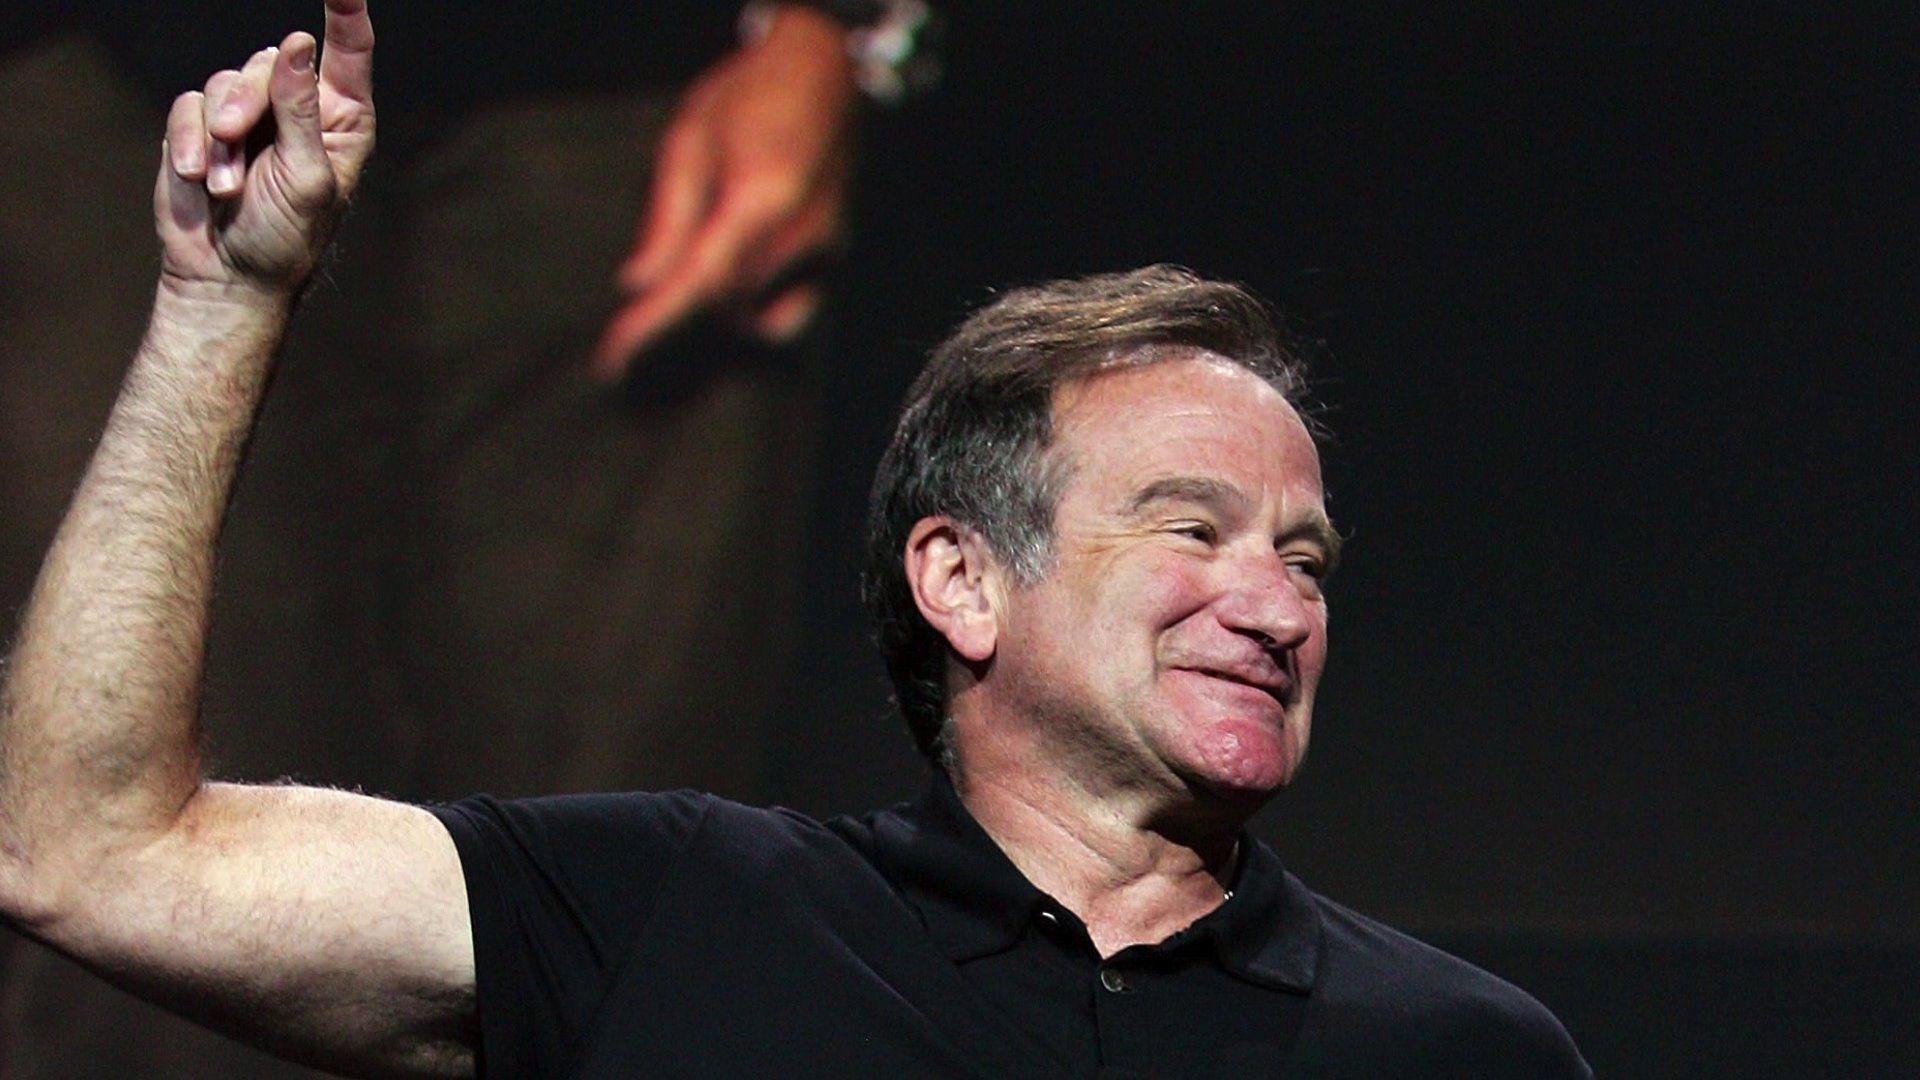 The famous Robin Williams shows his hand up wallpaper and image